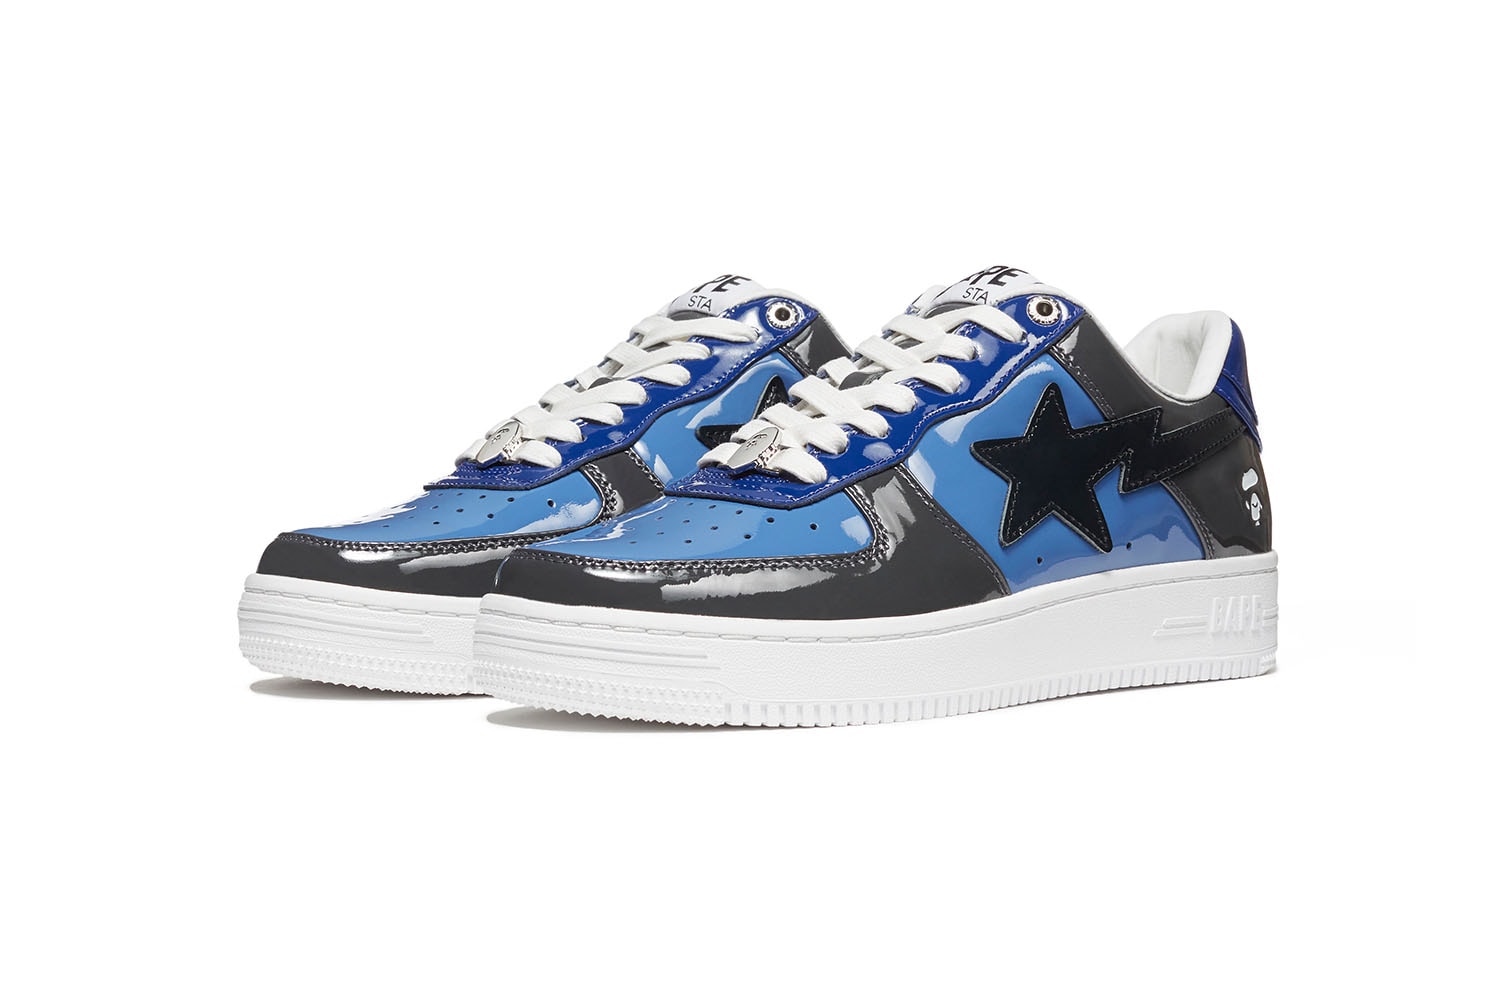 A Bathing Ape's BAPE STA Dropping Six New Colorful Camo Sneakers